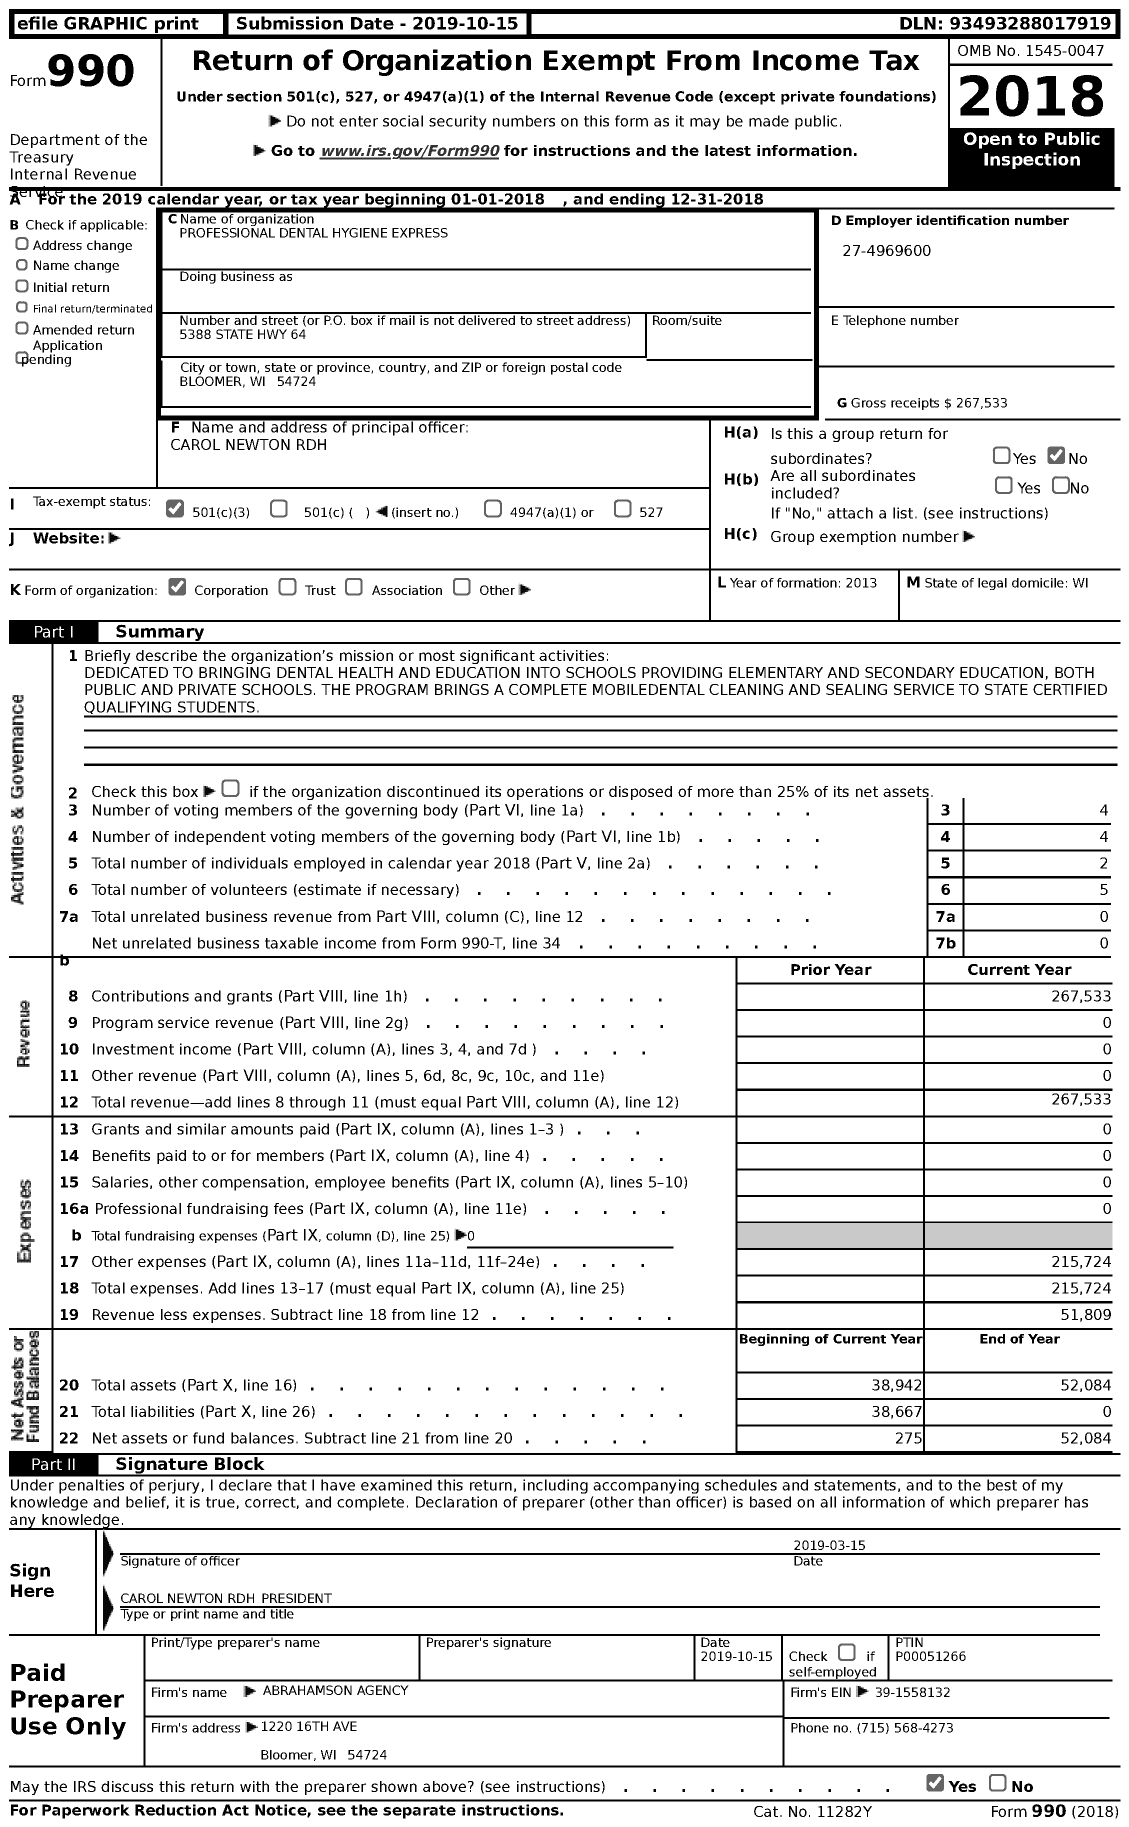 Image of first page of 2018 Form 990 for Professional Dental Hygiene Express